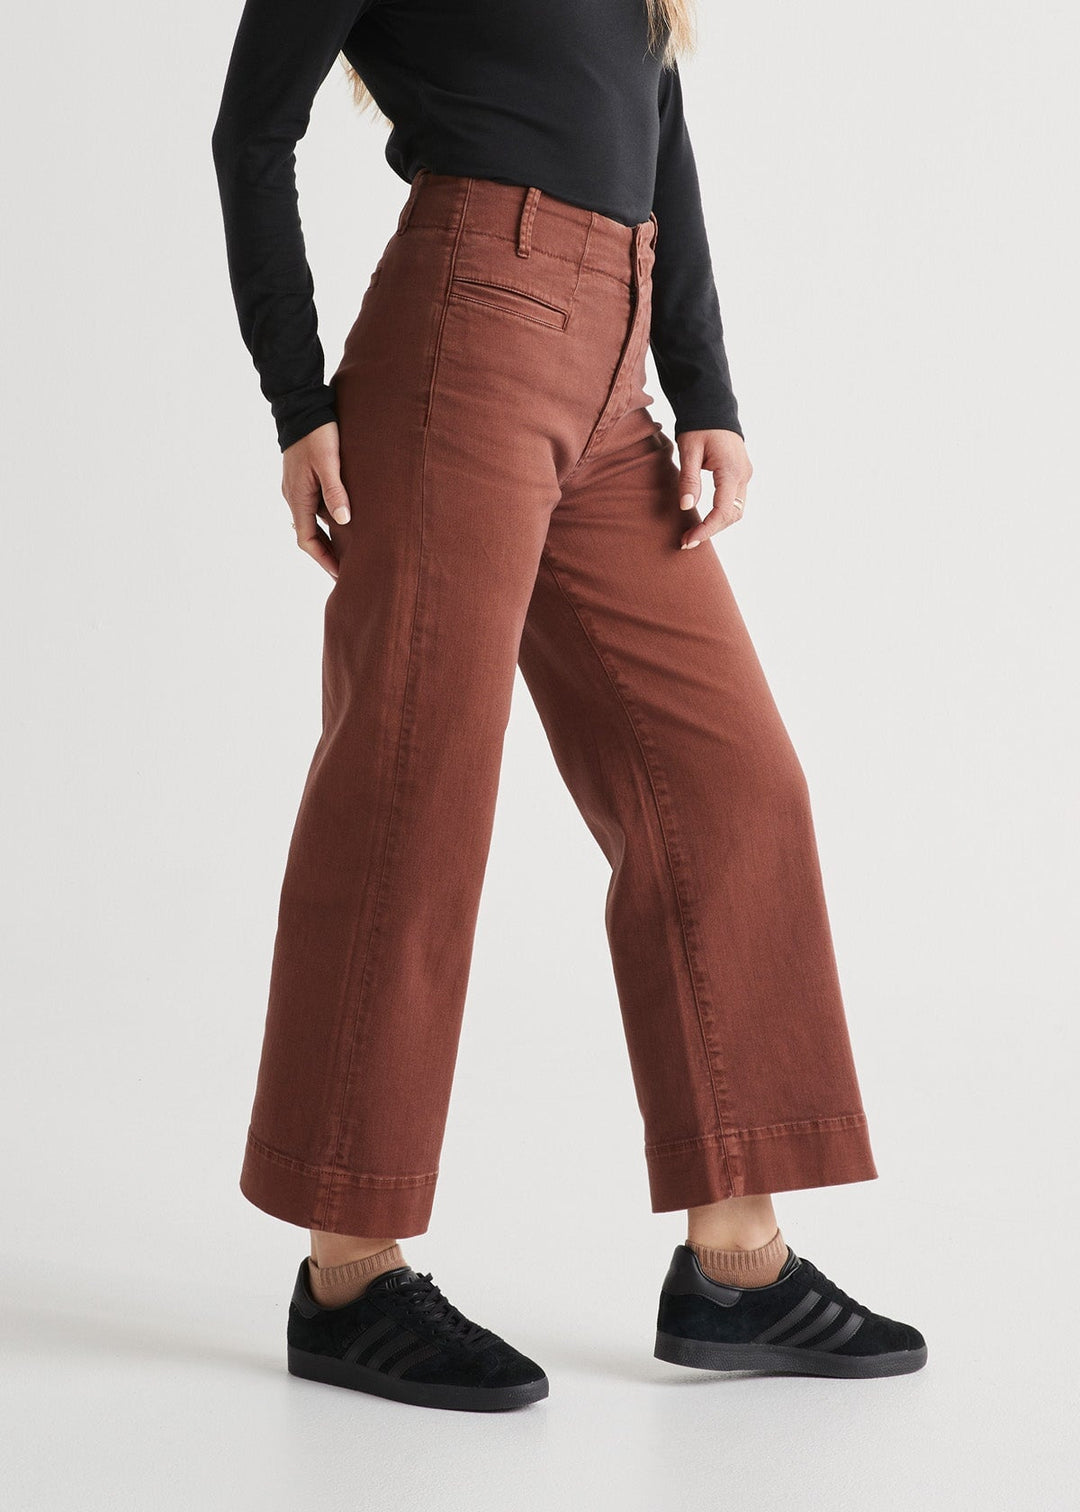 Duer Women's LuxTwill High Rise 28" Pants